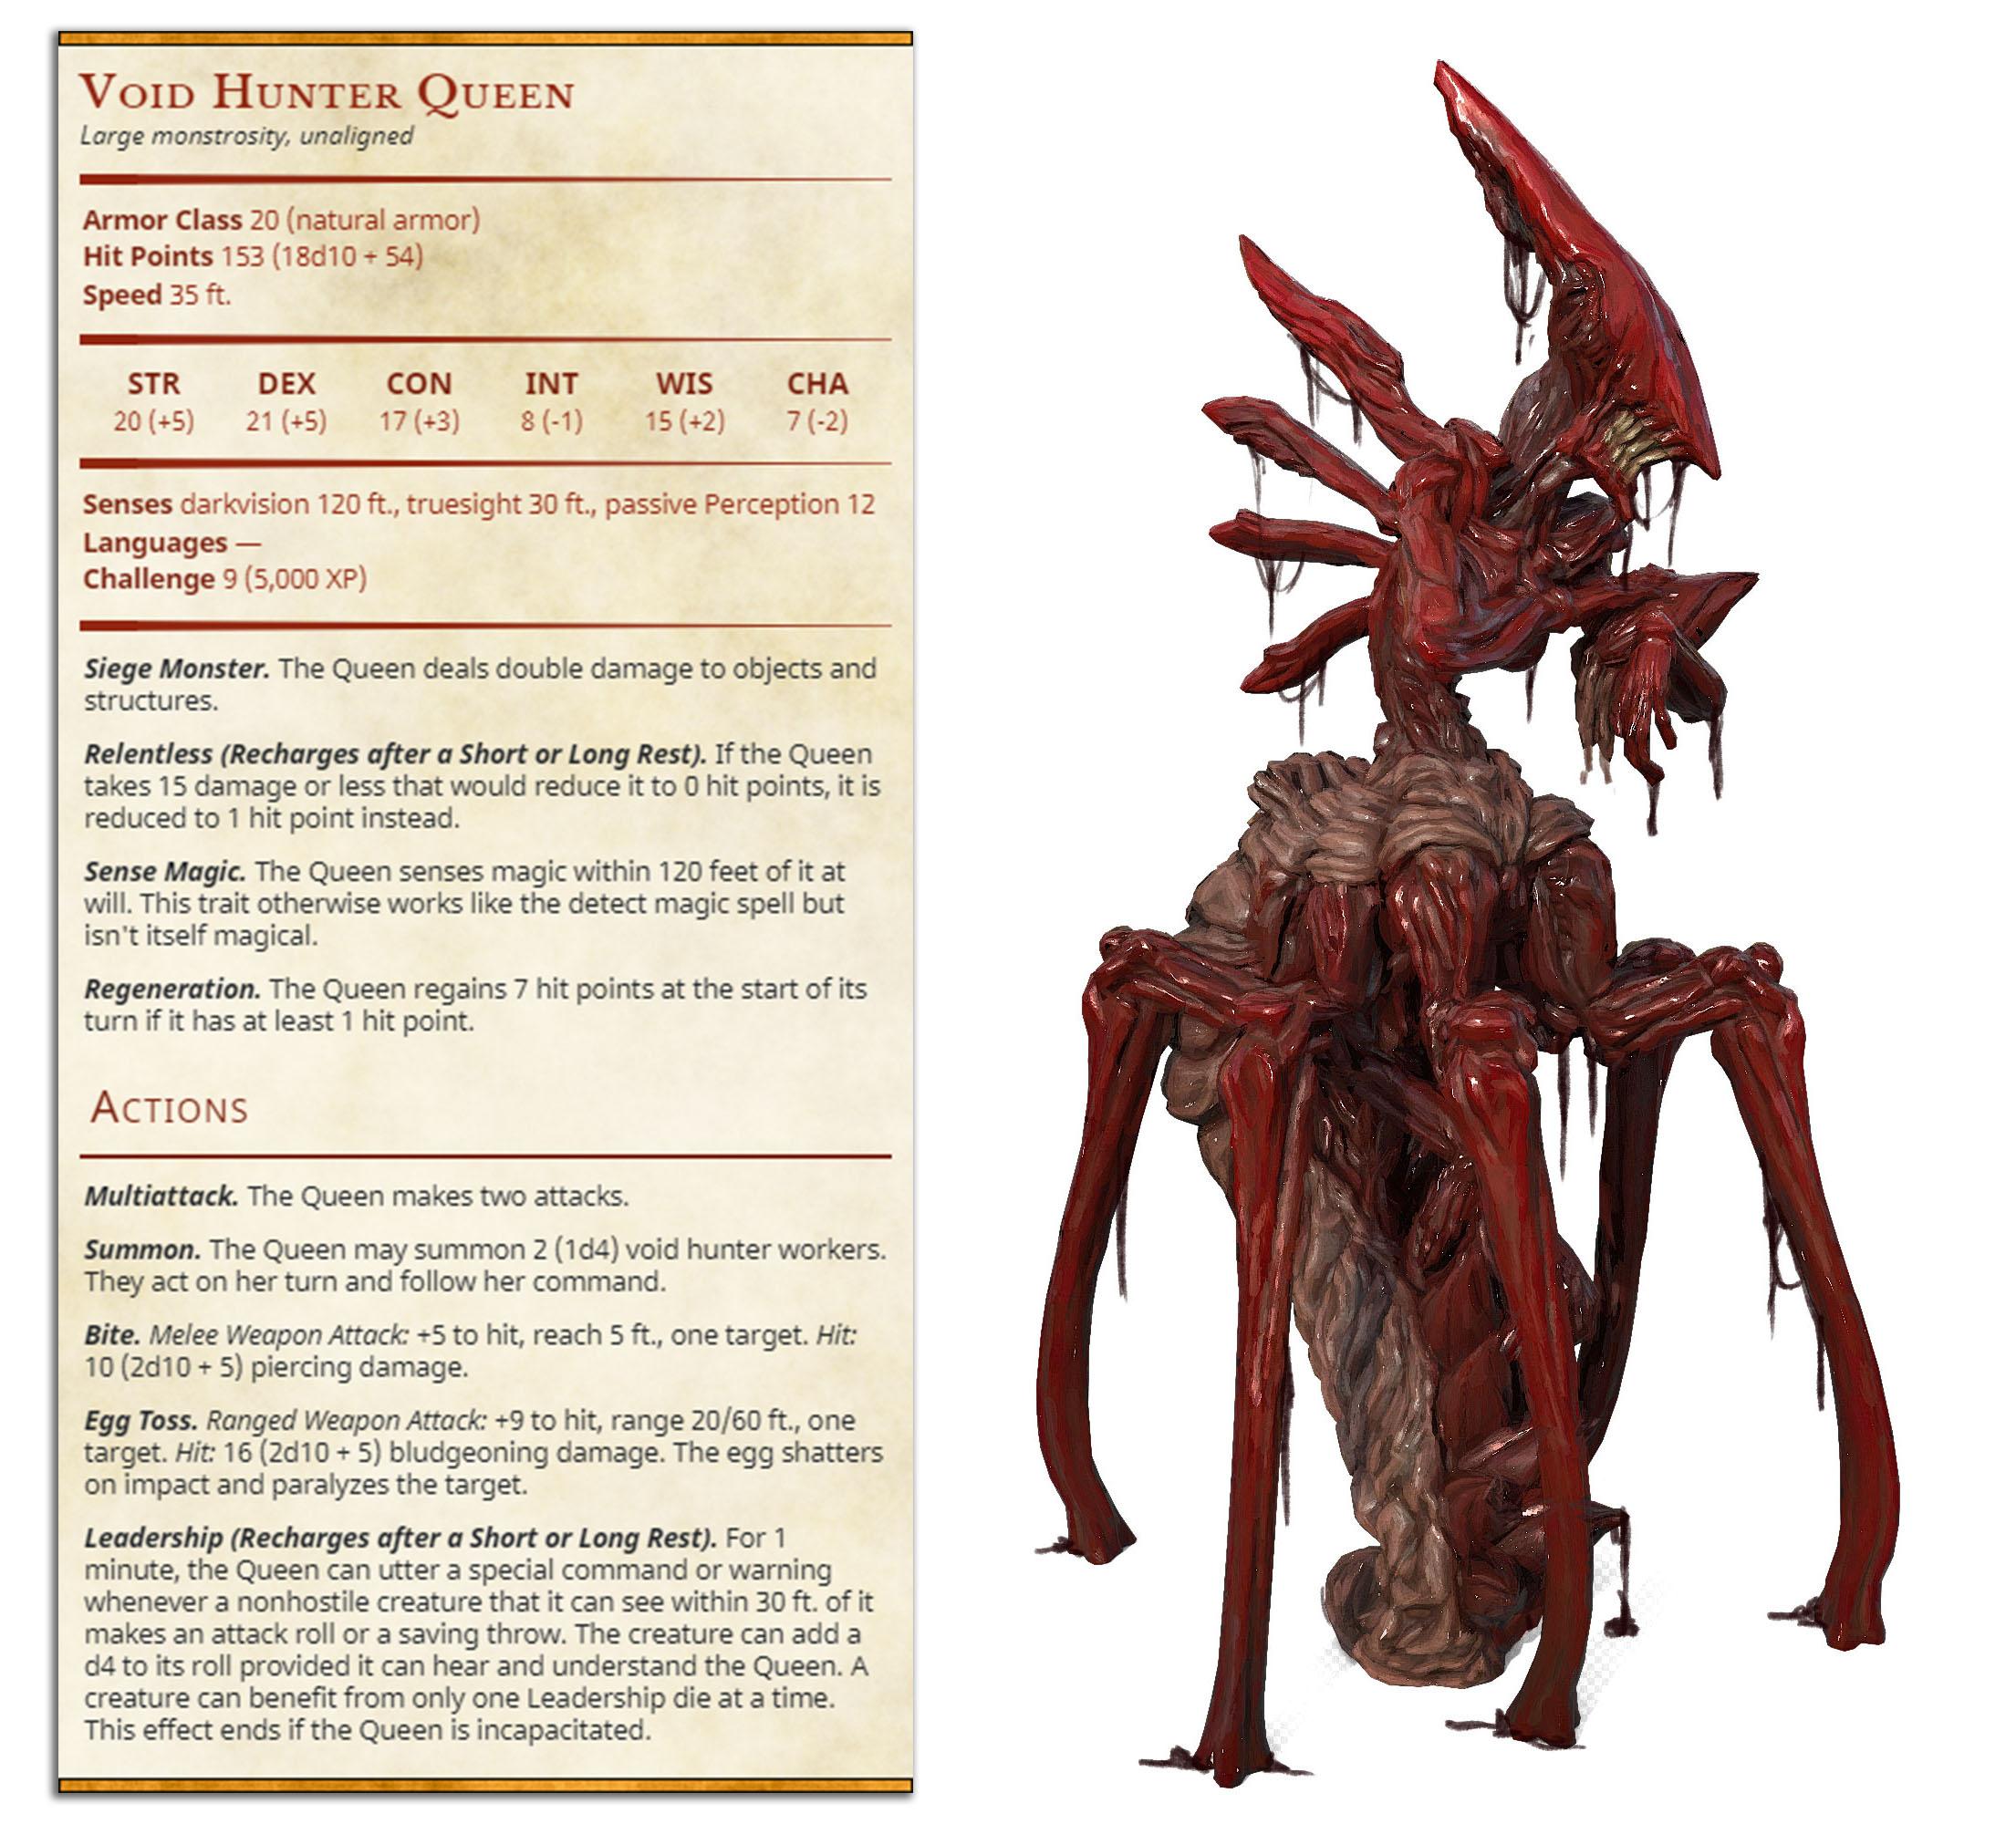 Void Hunter Queen - Creatures from Behind the Veil - PRESUPPORTED - Illustrated and Stats - 32mm sca 3d model